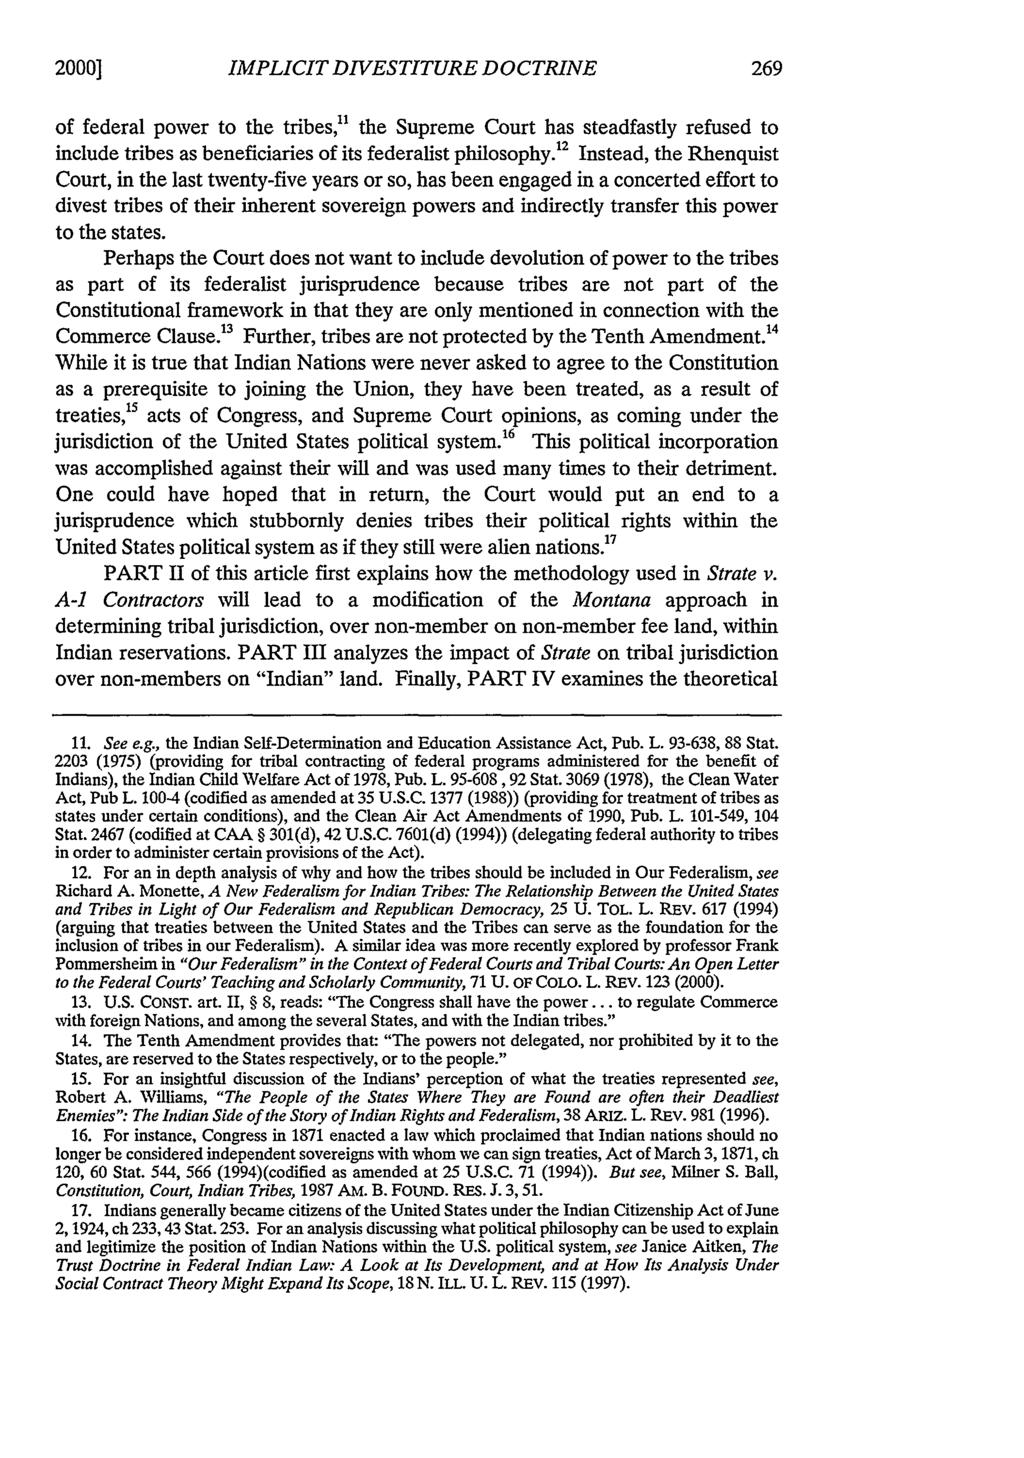 2000] Skibine: The Court's Use of the Implicit Divestiture Doctrine to Implement IMPLICIT DIVESTITURE DOCTRINE of federal power to the tribes," the Supreme Court has steadfastly refused to include